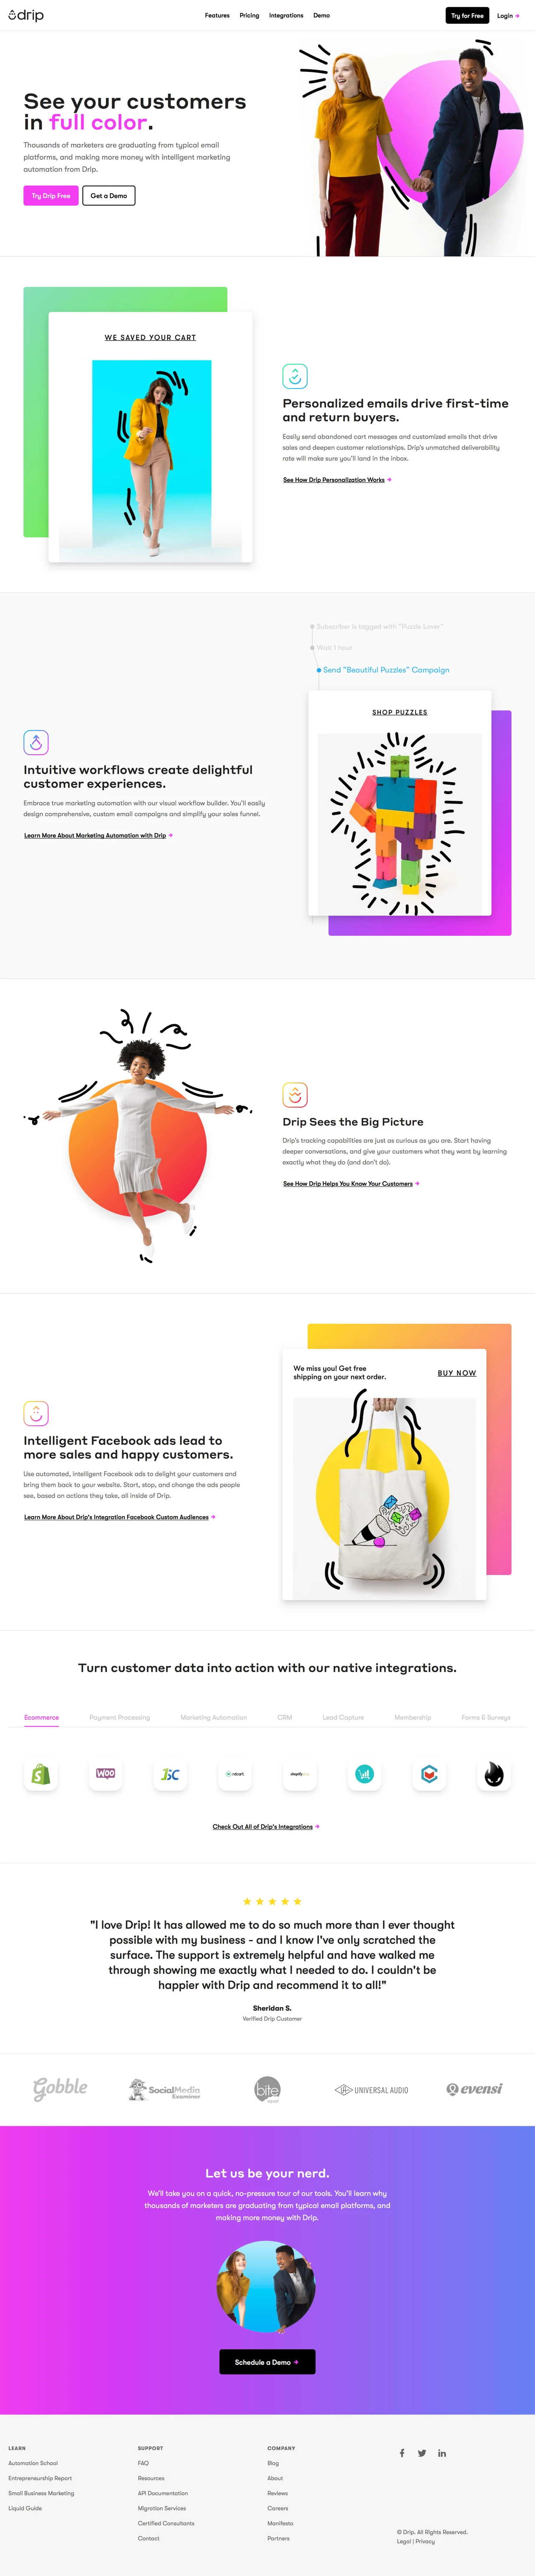 Drip Landing Page Example: Drip is the first ECRM–an Ecommerce CRM designed for building personal and profitable relationships with your customers at scale.